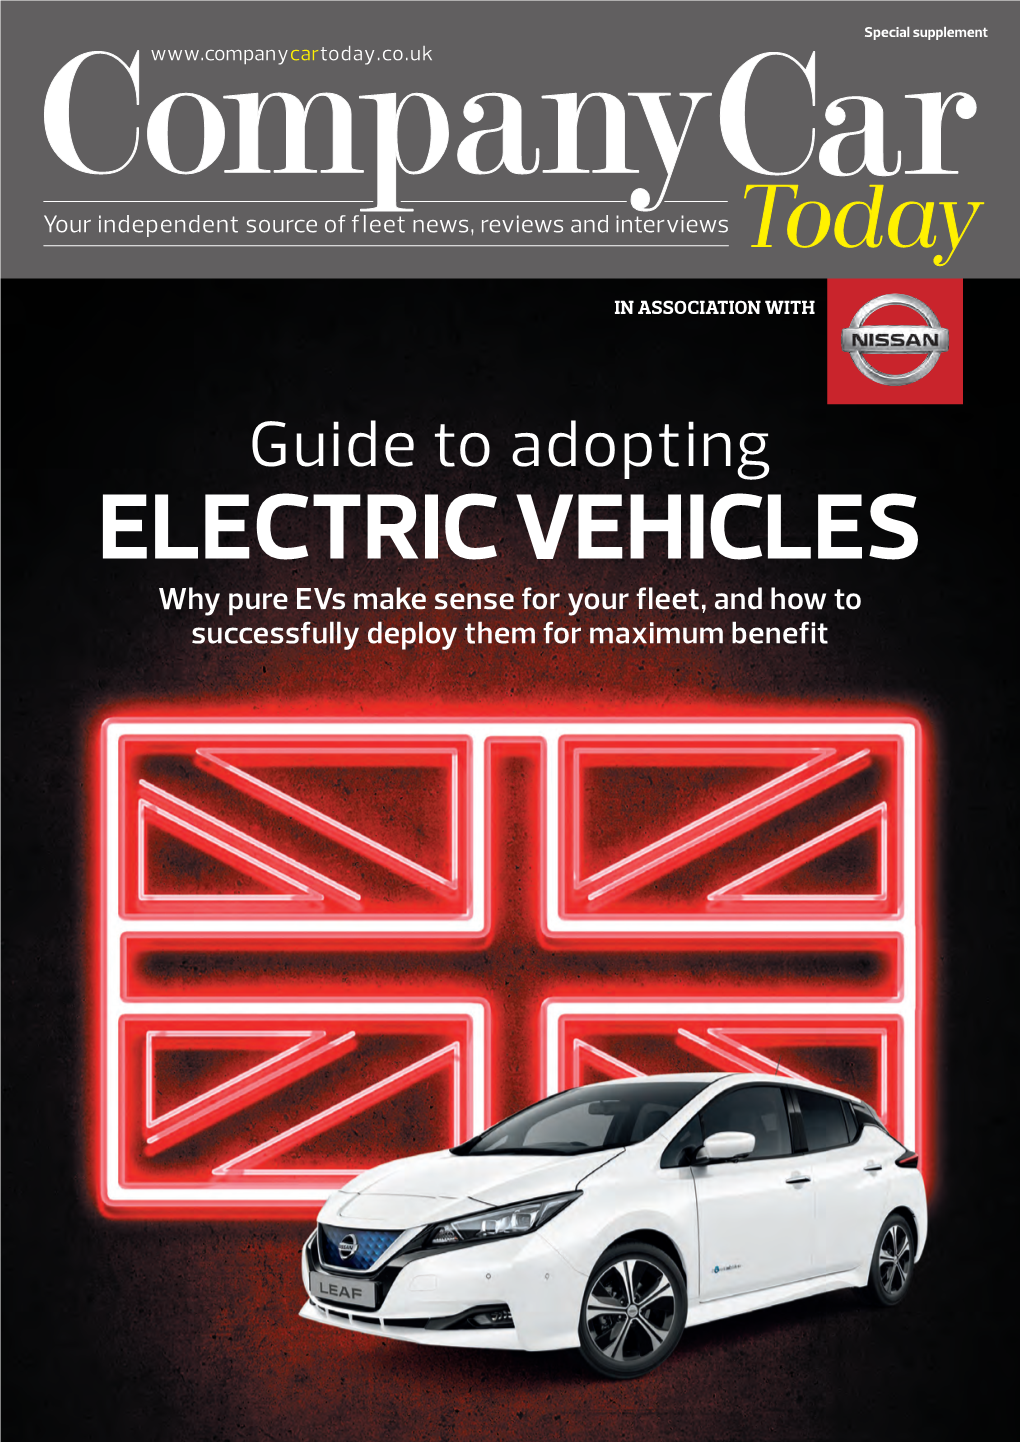 Company Car Today Guide to Electric Vehicles in Association with Nissan